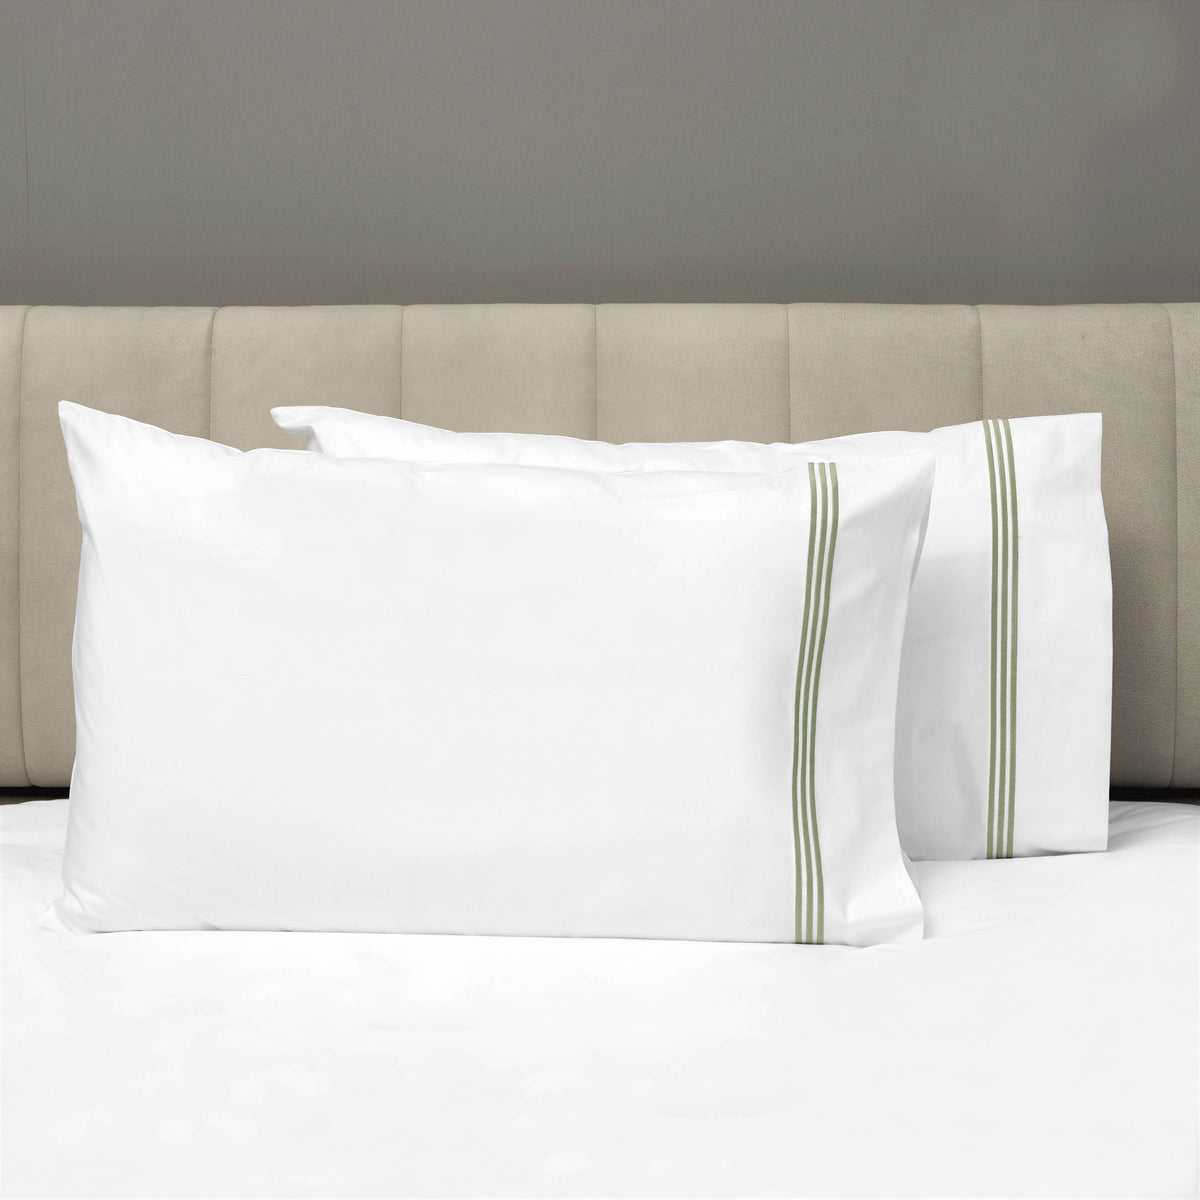 Pair of Pillowcases of Signoria Platinum Percale Bedding in White/Olive Green Color